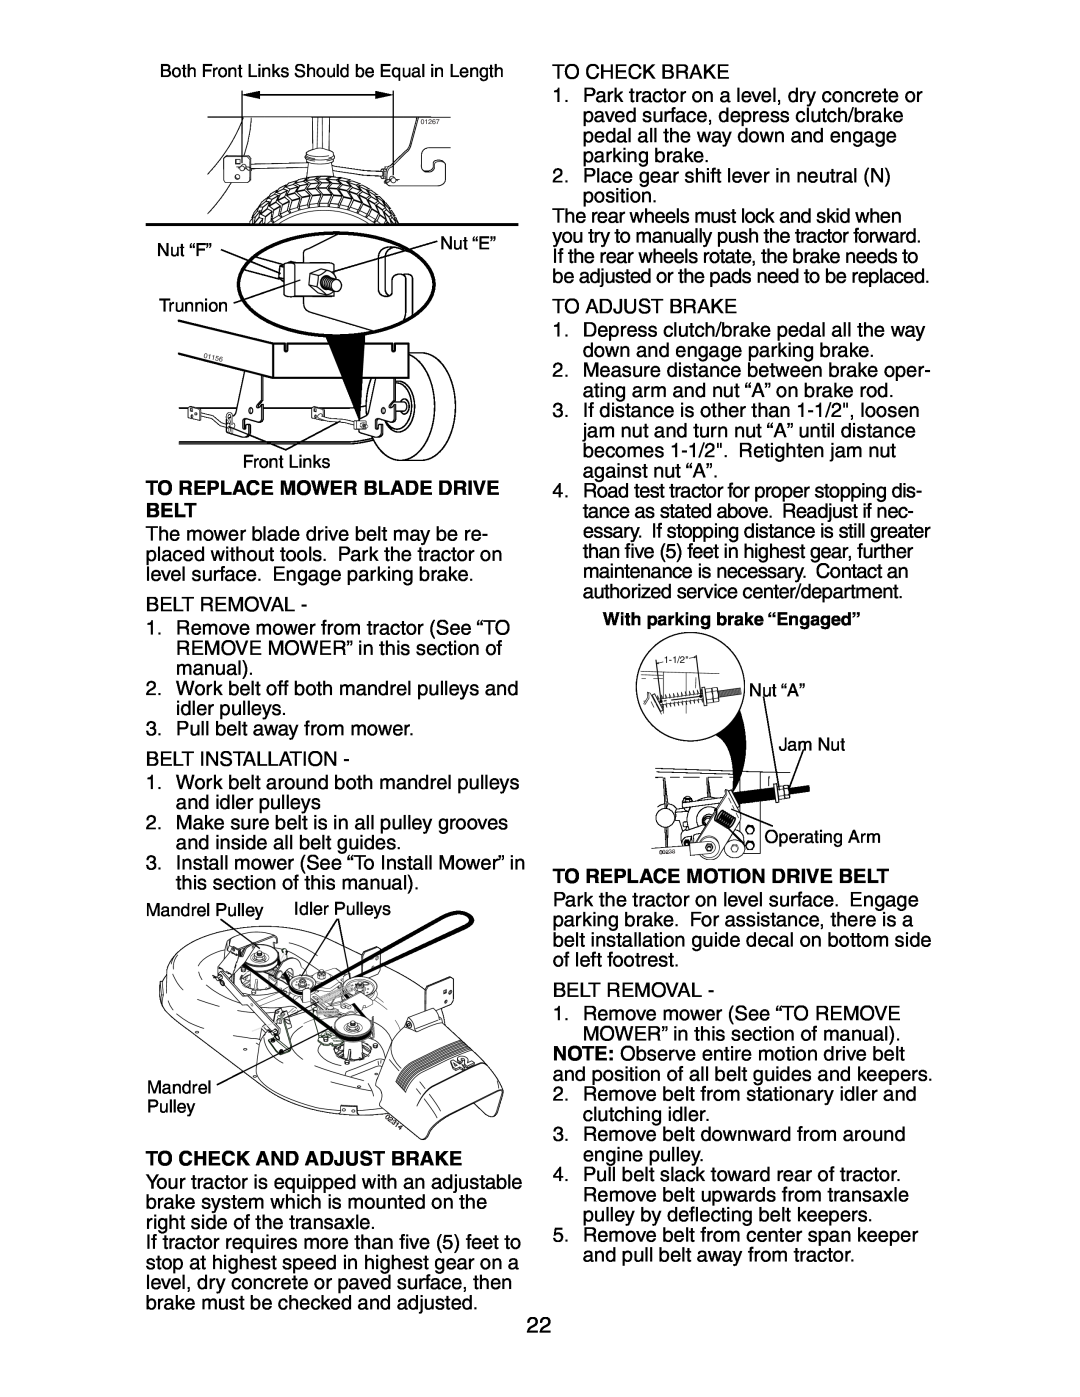 Poulan CO1842STA manual To Replace Mower Blade Drive Belt, To Check And Adjust Brake, To Replace Motion Drive Belt 